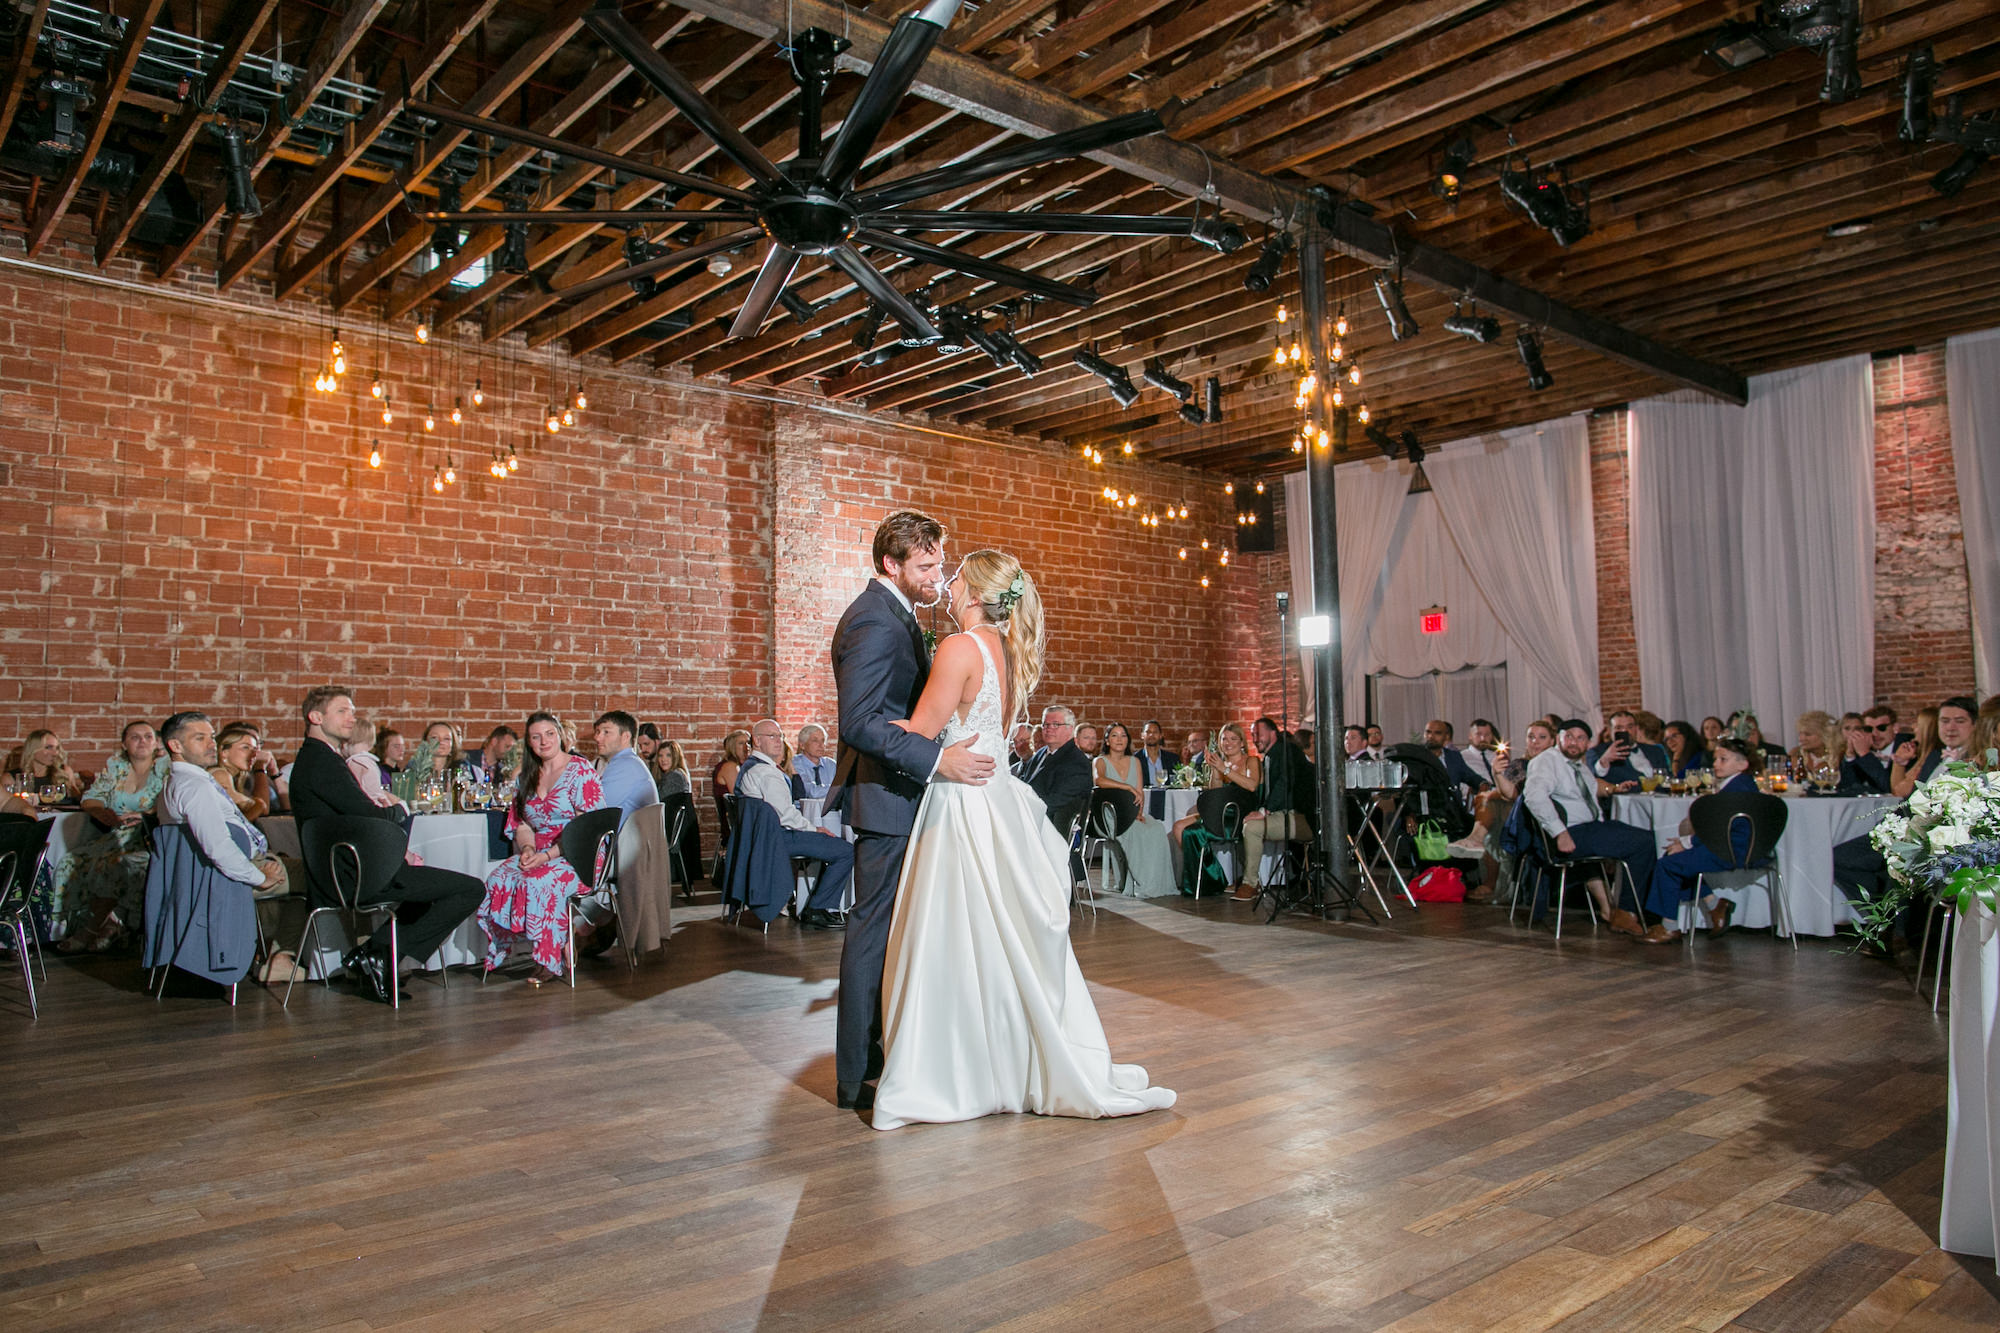 Bride and Groom First Dance | St Pete Industrial Wedding Venue NOVA 535 | Photographer Carrie Wildes Photography